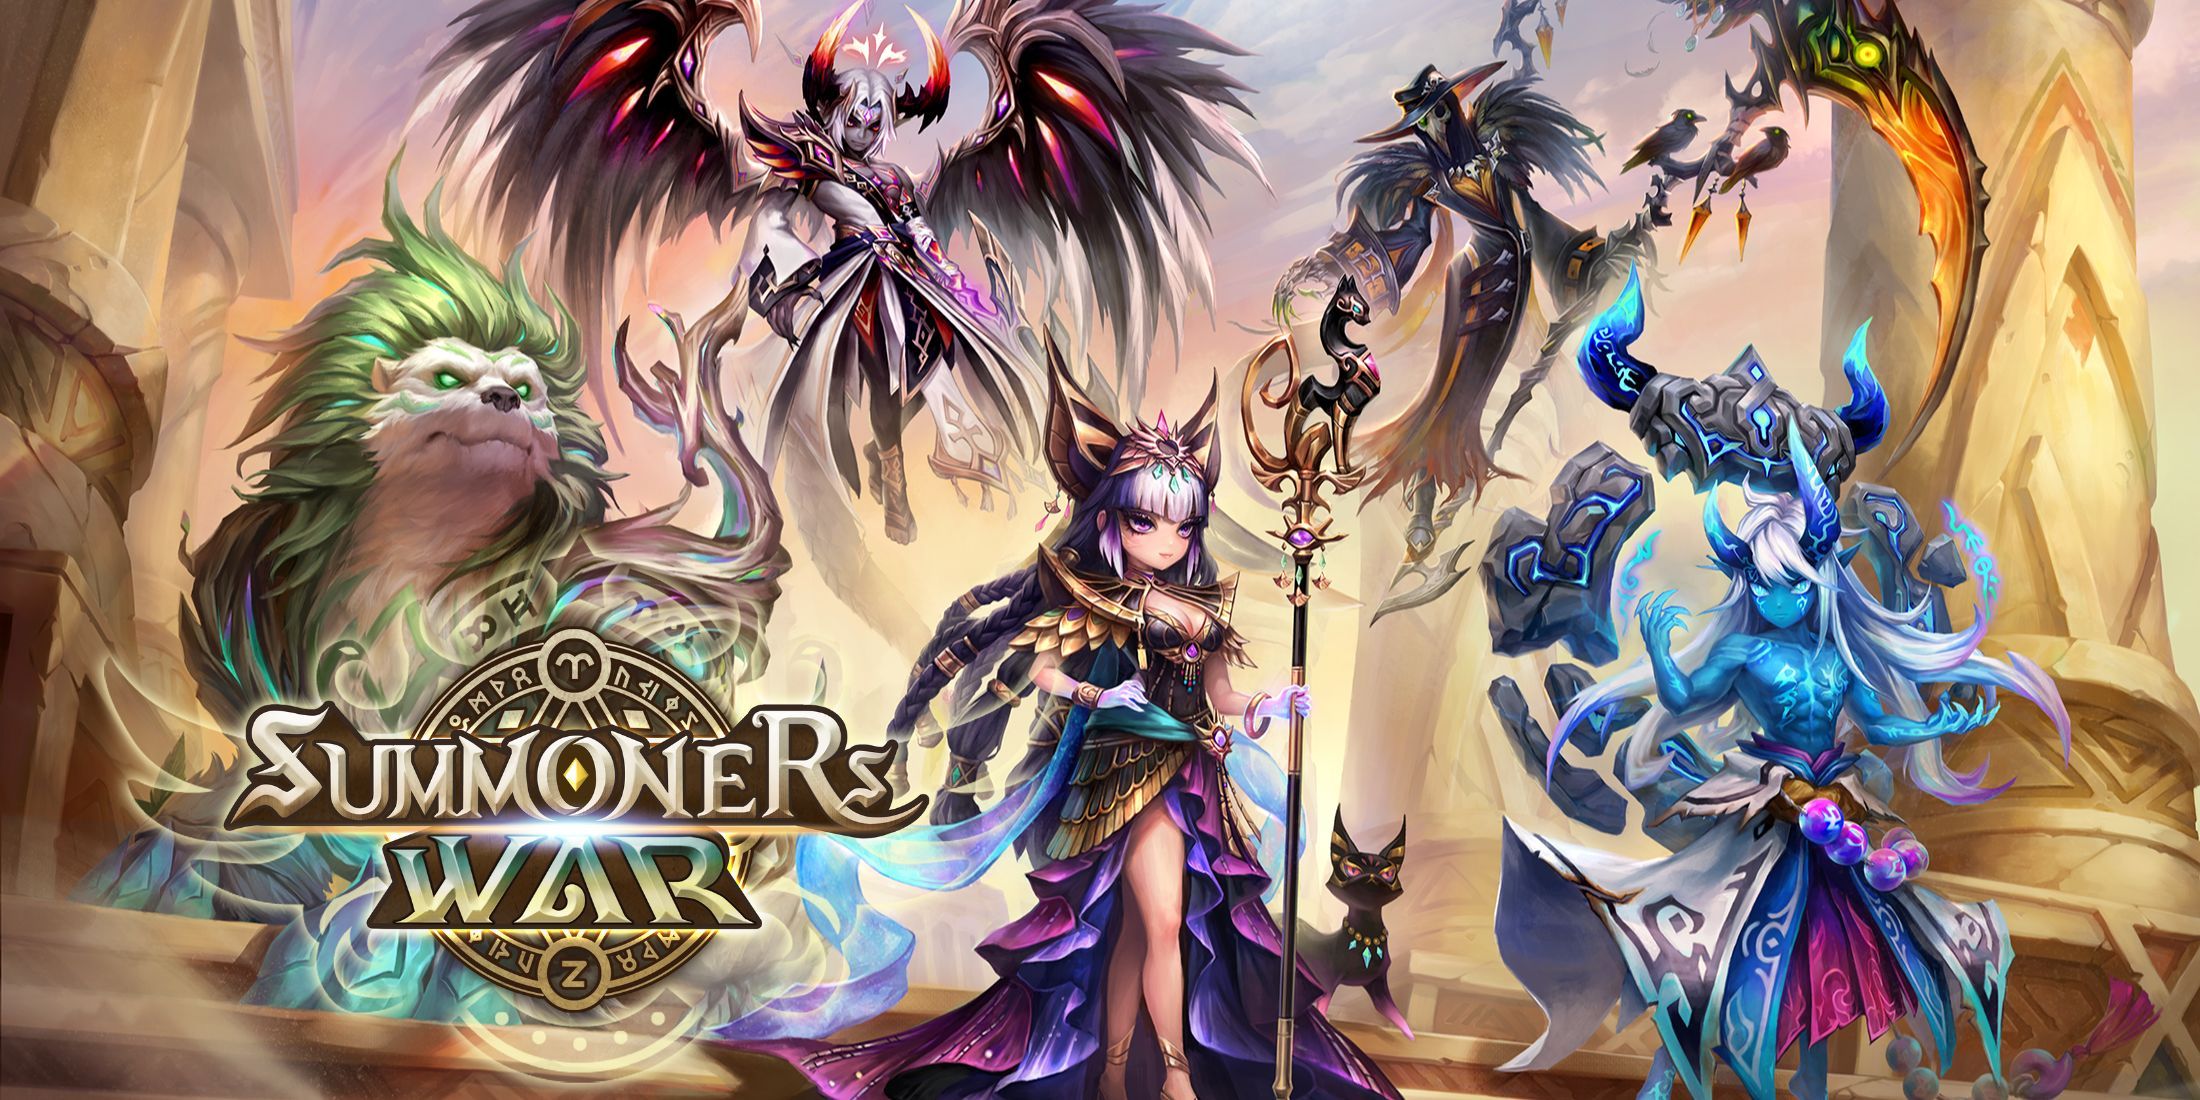 The developers of Summoners War look back on the game’s 10th anniversary